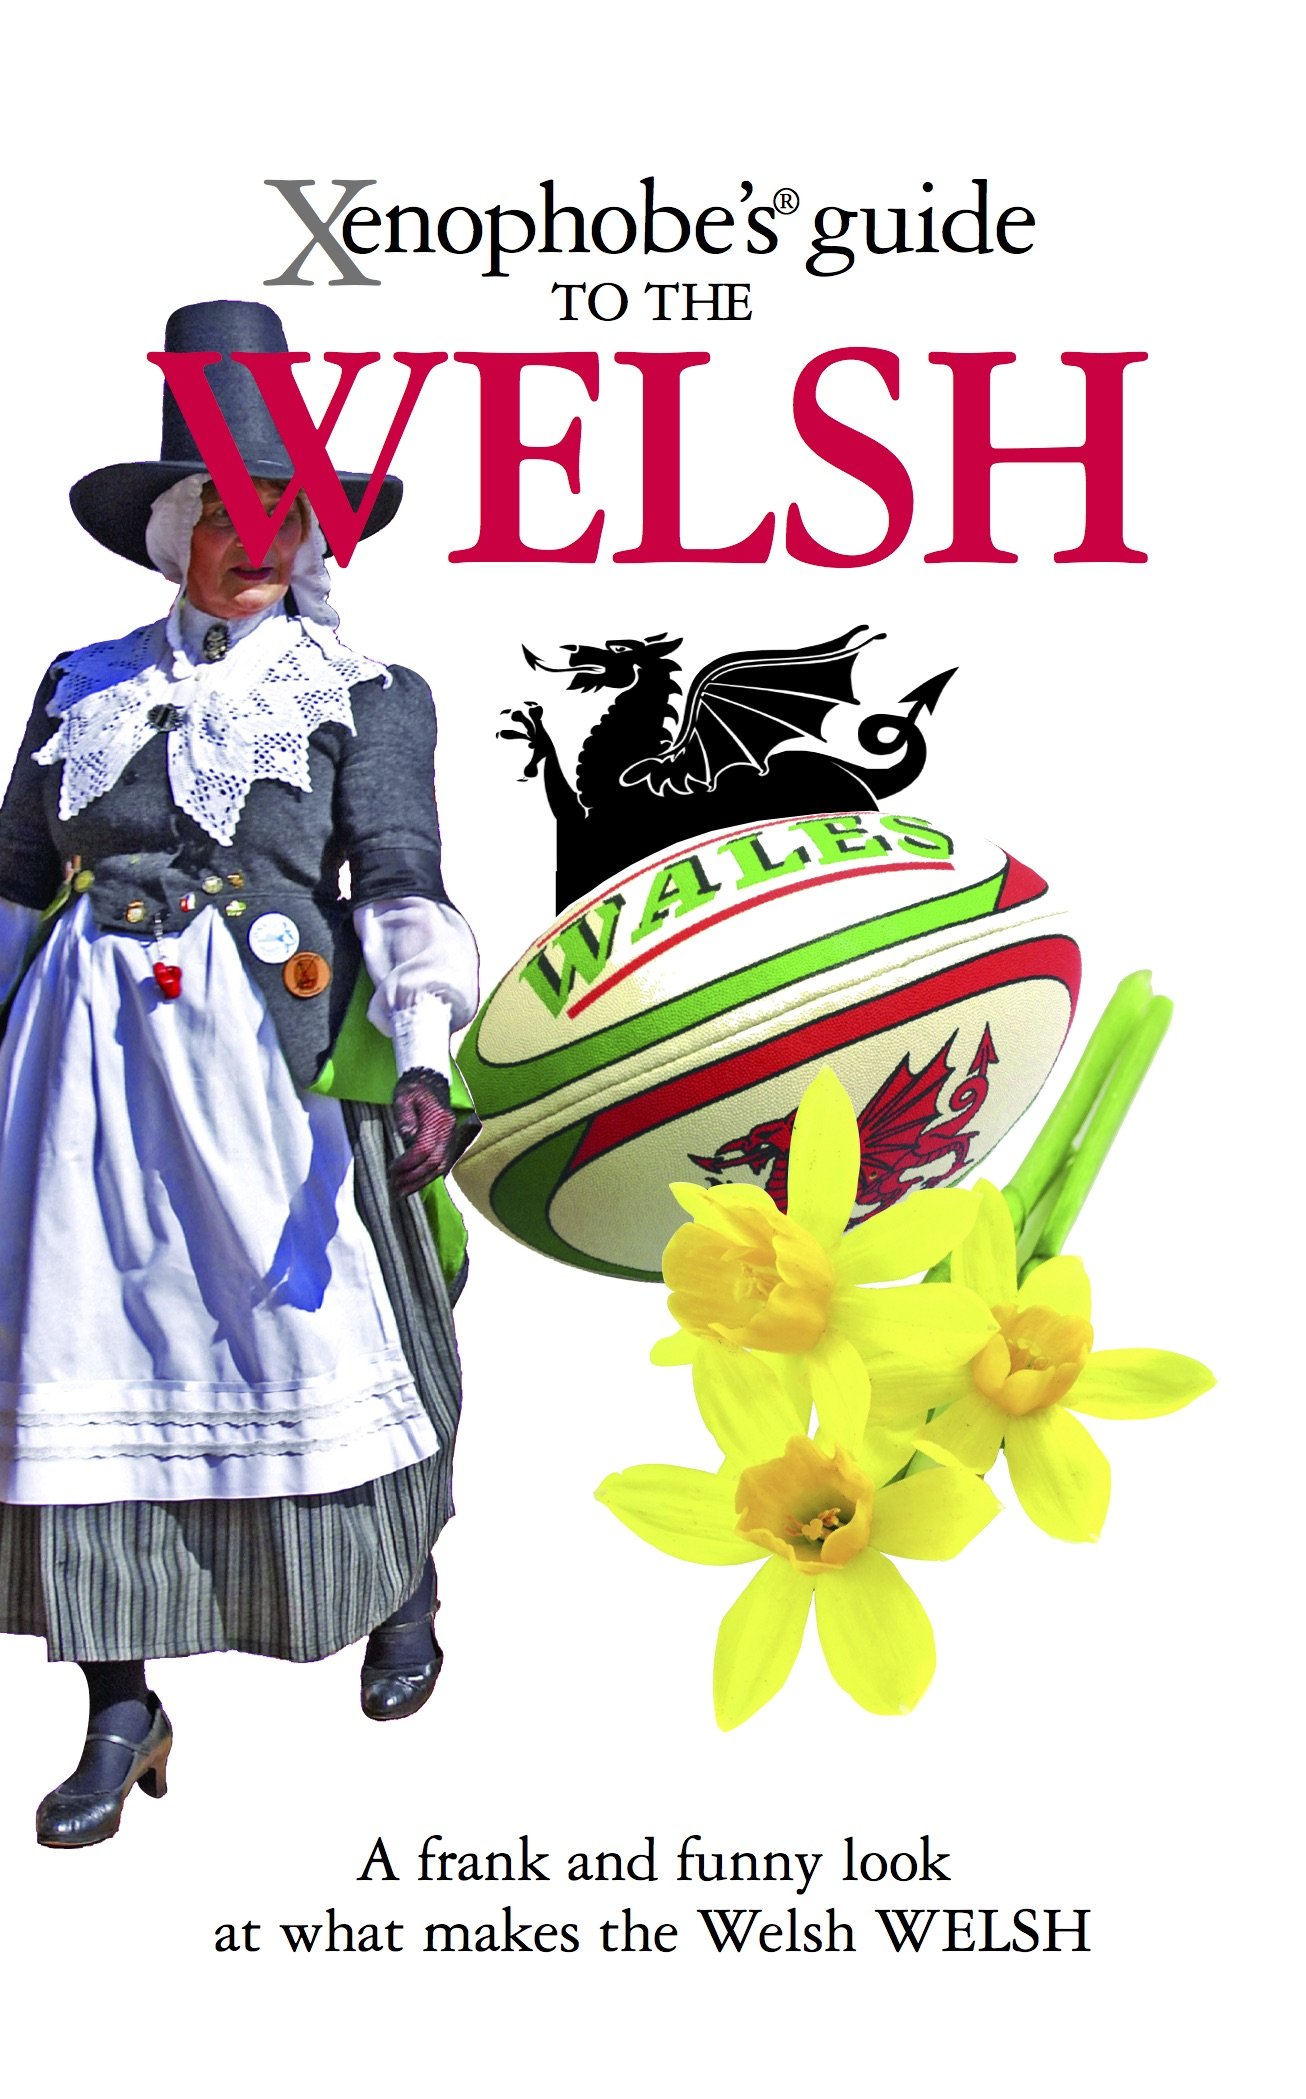 XENOPHOBE'S GUIDE TO THE WELSH